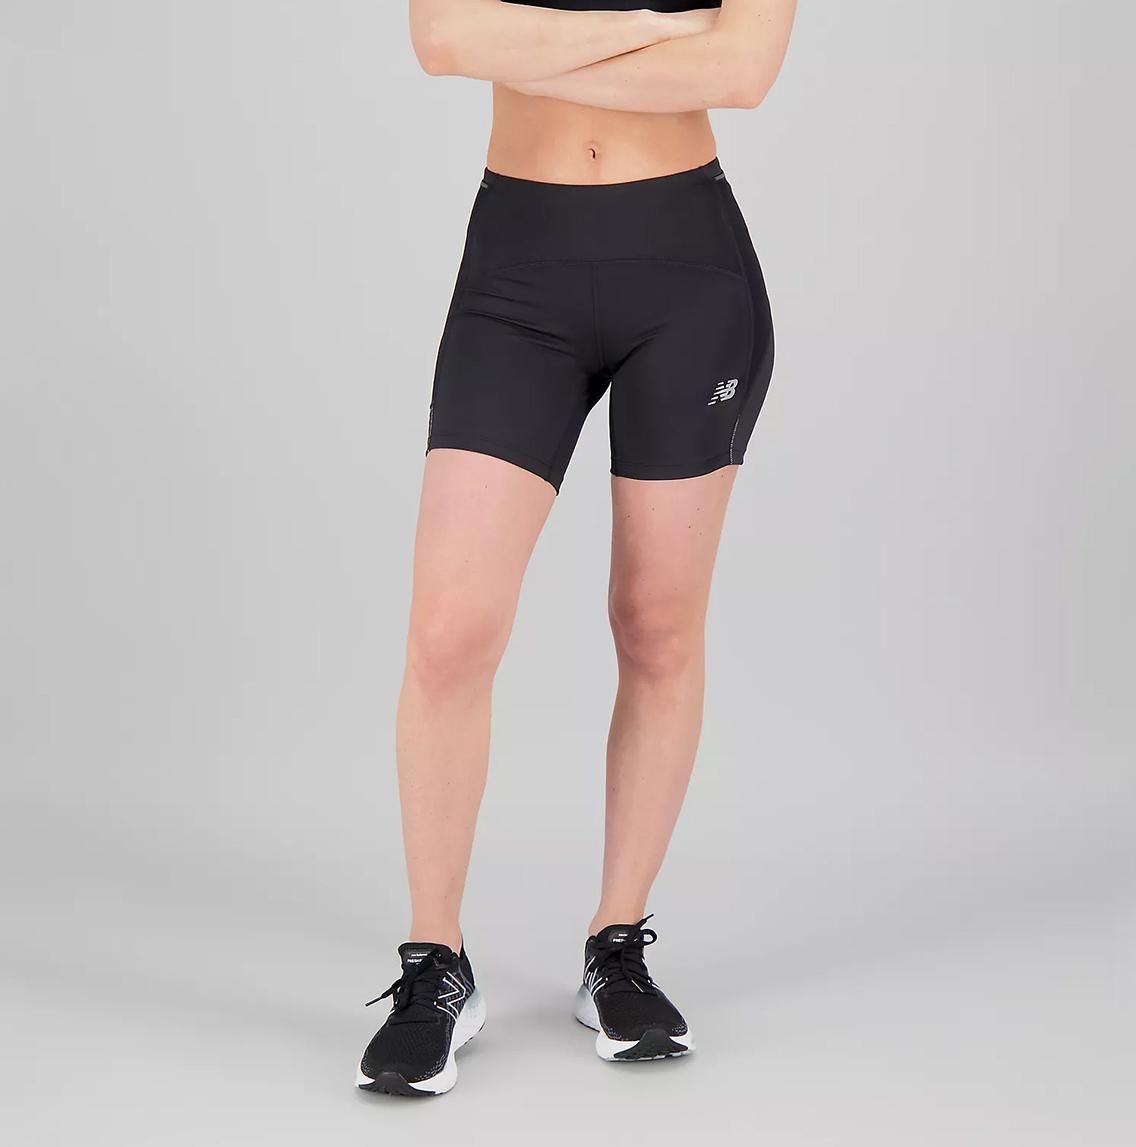 New Balance Womens Impact Fitted Shorts - Black